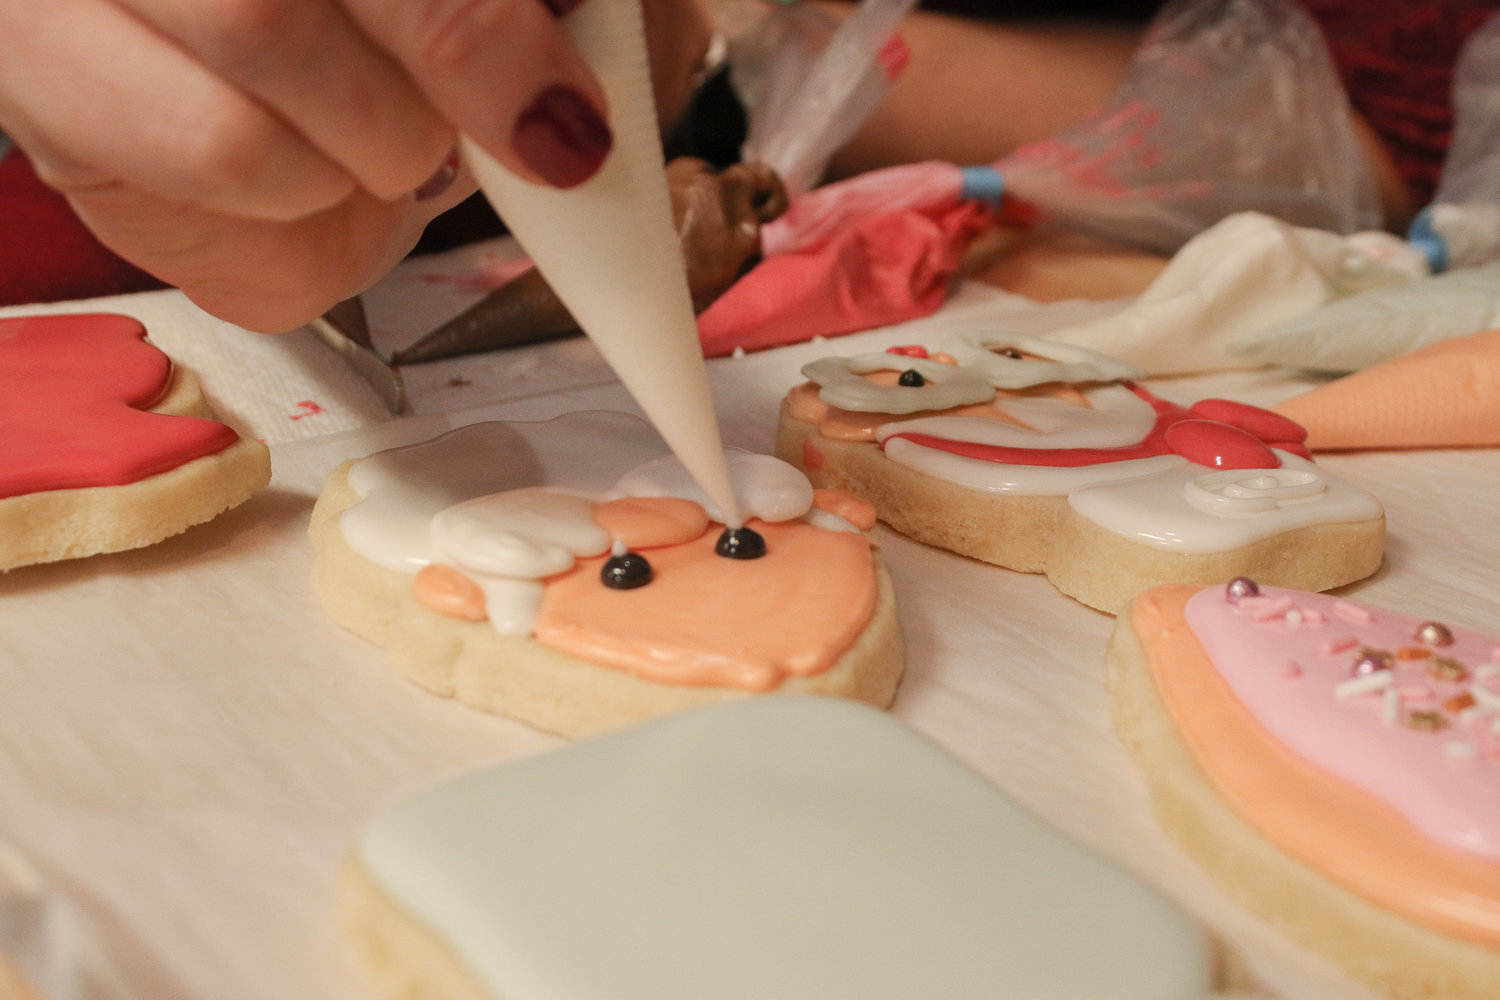 Anna Martin, owner of Anna's Bakery, adds a glimmer to the eyes of a Santa sugar cookie she was decorating during a royal icing cookie decorating class she hosted at the Dandelion Creative Space on Sunday.